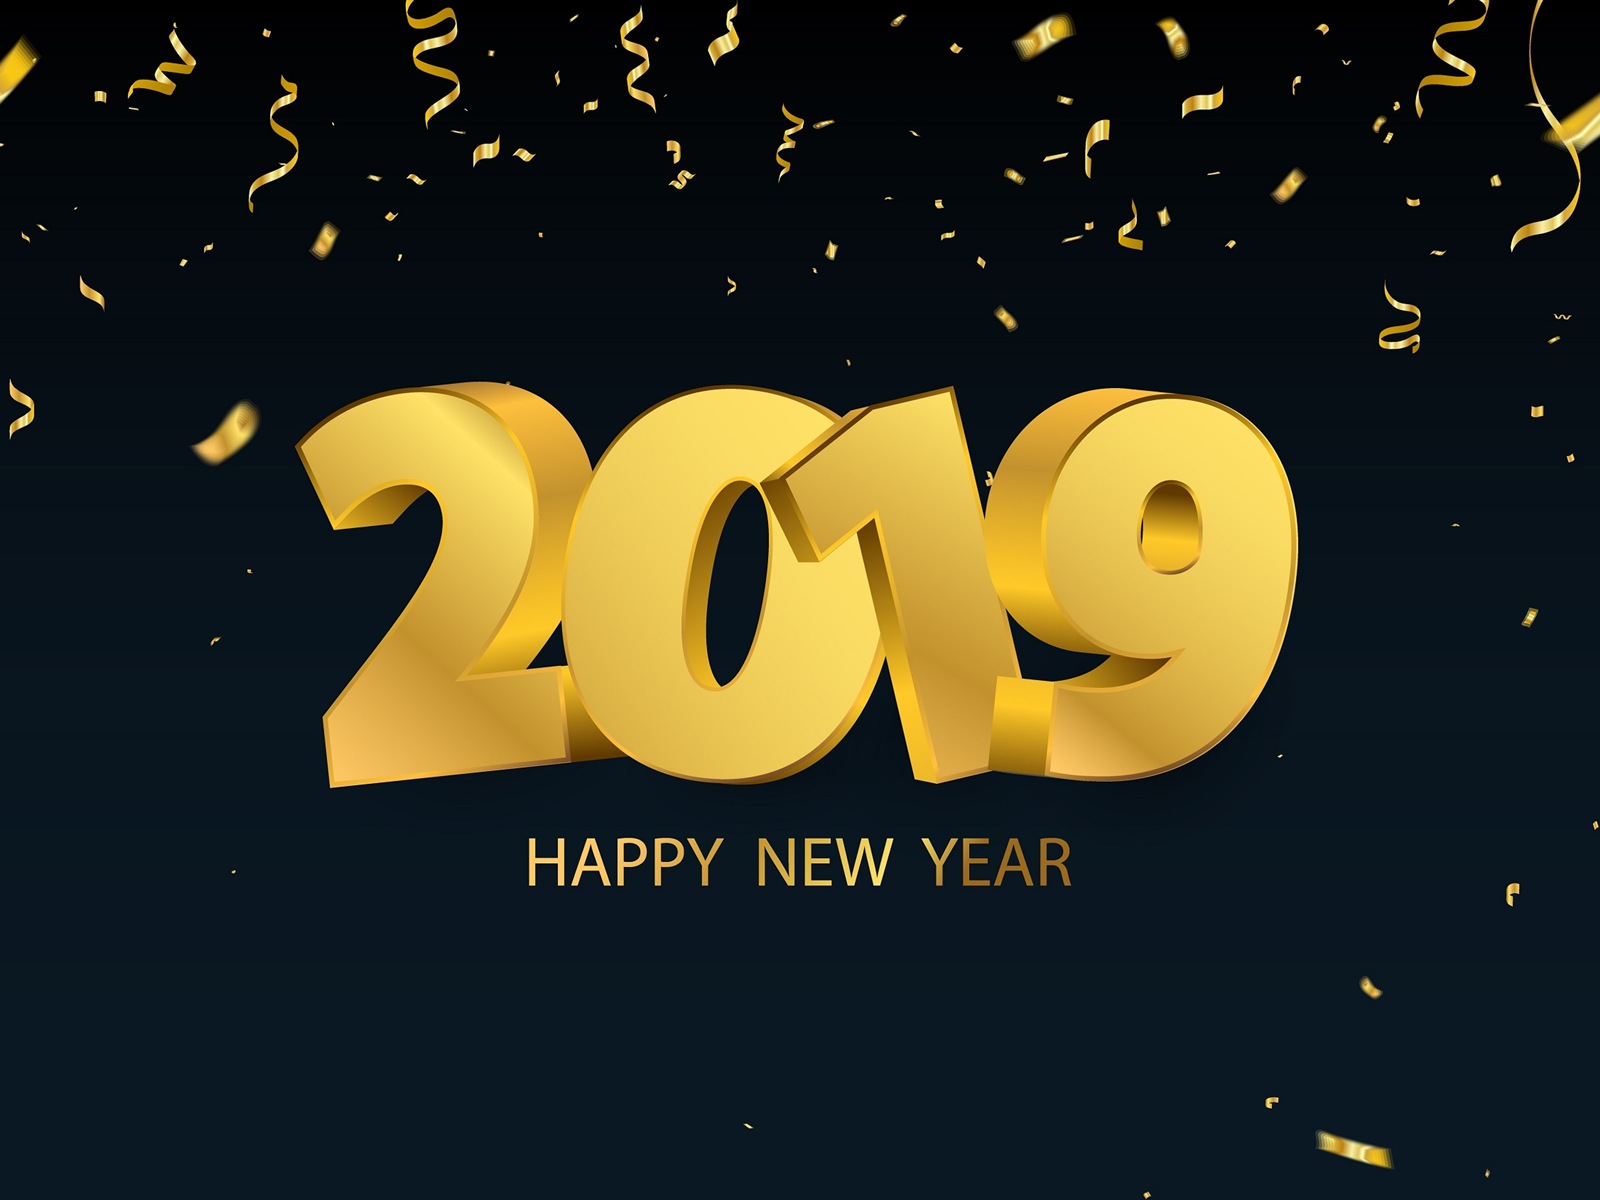 Happy New Year 2019 HD wallpapers #13 - 1600x1200